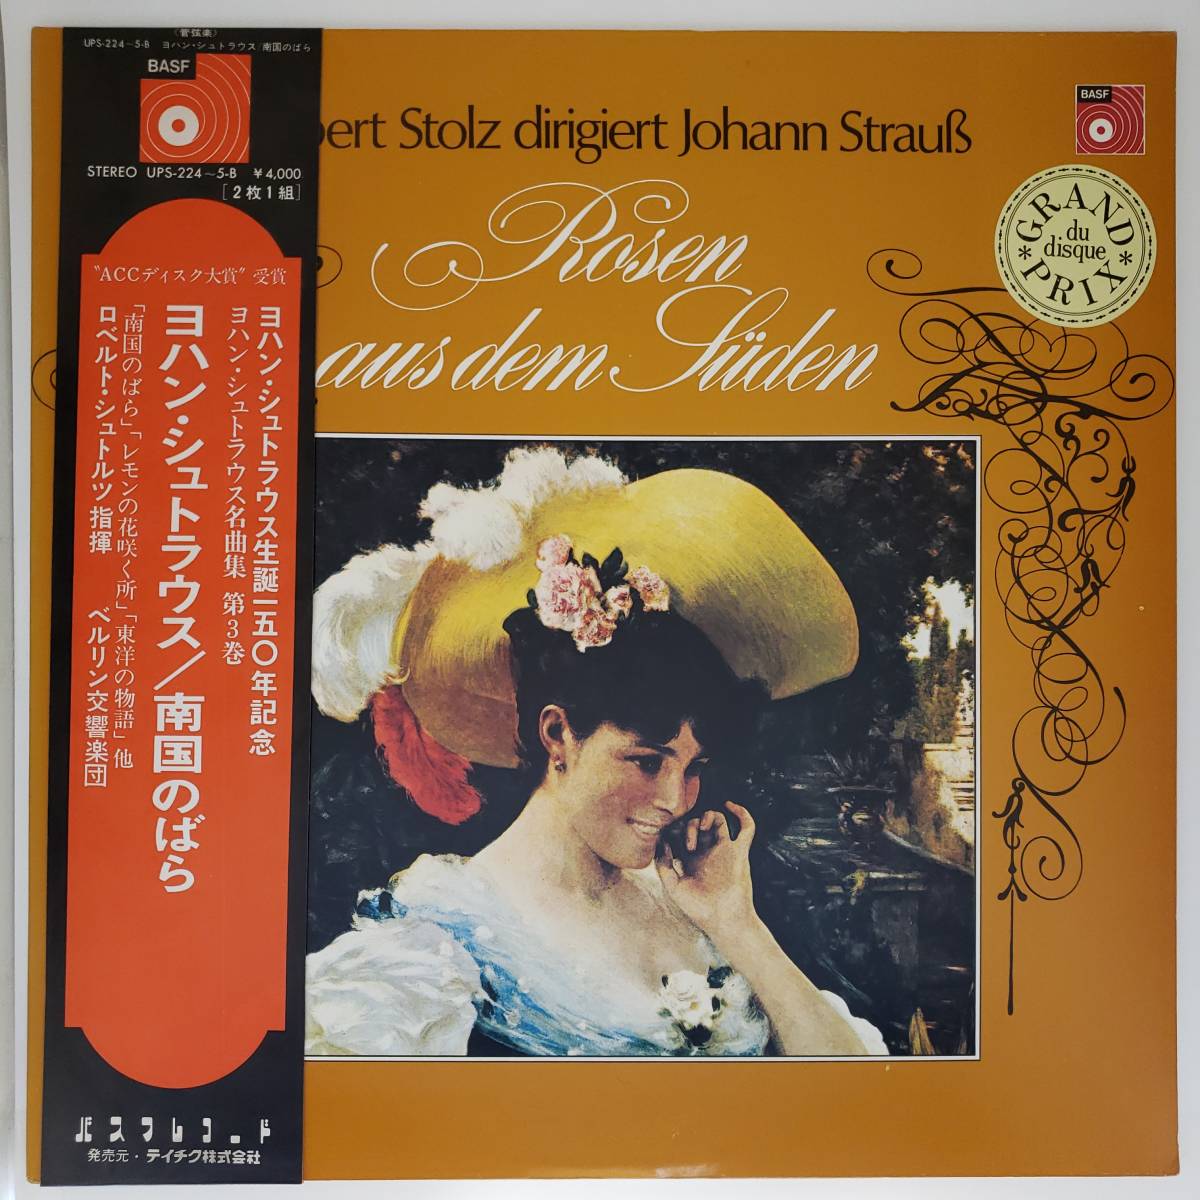 Ryobaya ◆ LP ◆ Strauss ★ J. Strauss = Masterpiece Collection Volume 3 ★ Yen dance song "Travel Aventure"/Yen Dance "Tropical Rose" and other 13 songs 2 pieces ◆ C10051